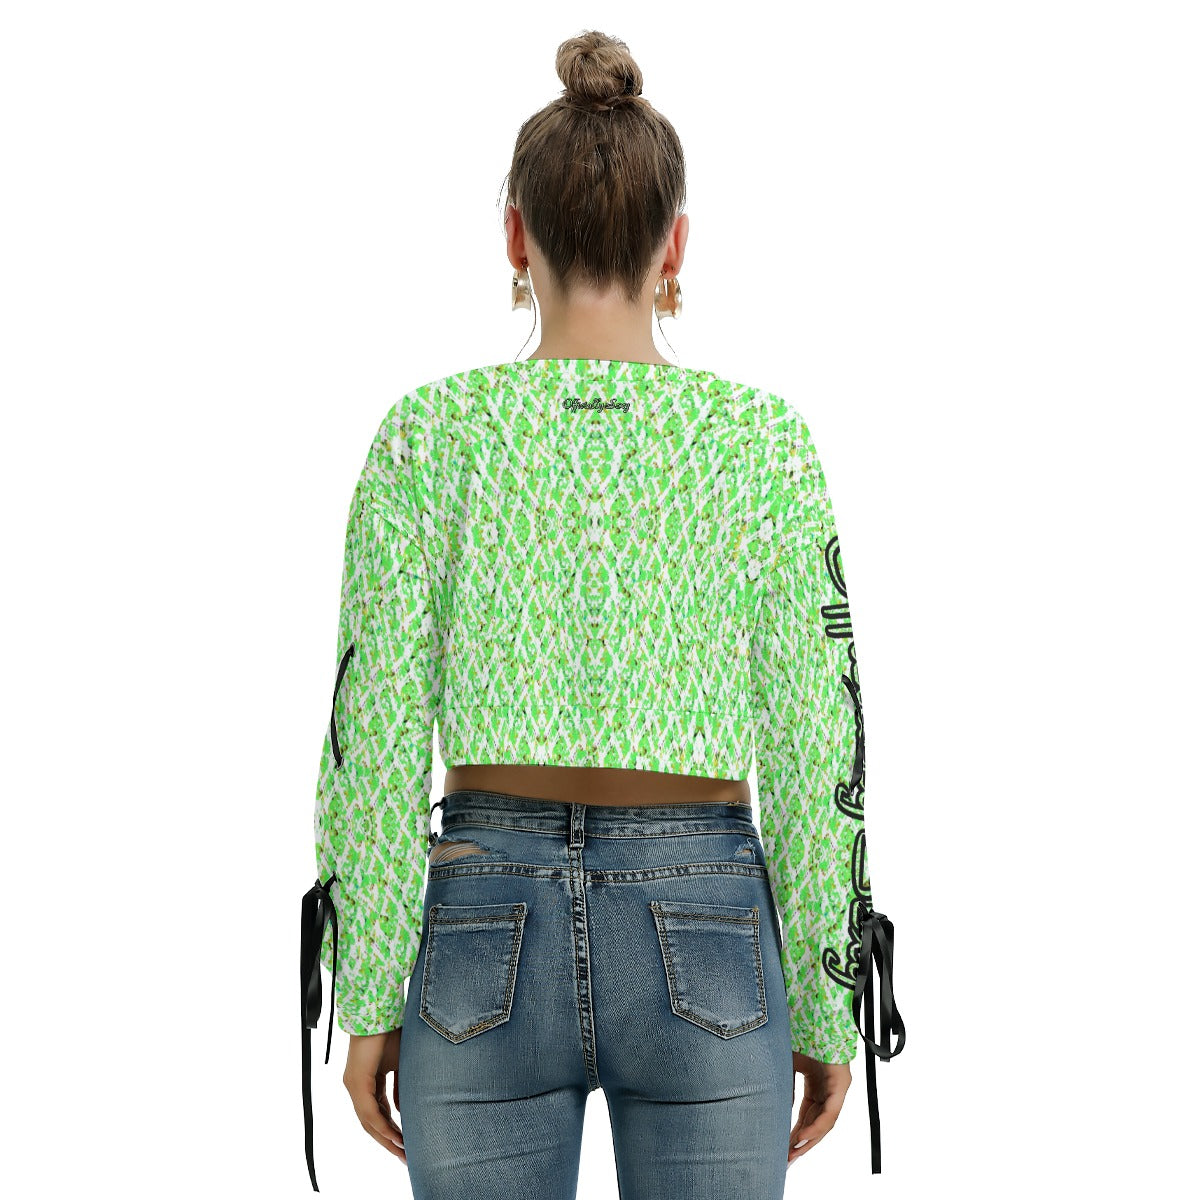 Officially Sexy Neon Green Stitched FHC Women's Long Sleeve Cropped Sweatshirt With Lace up Sleeves Back